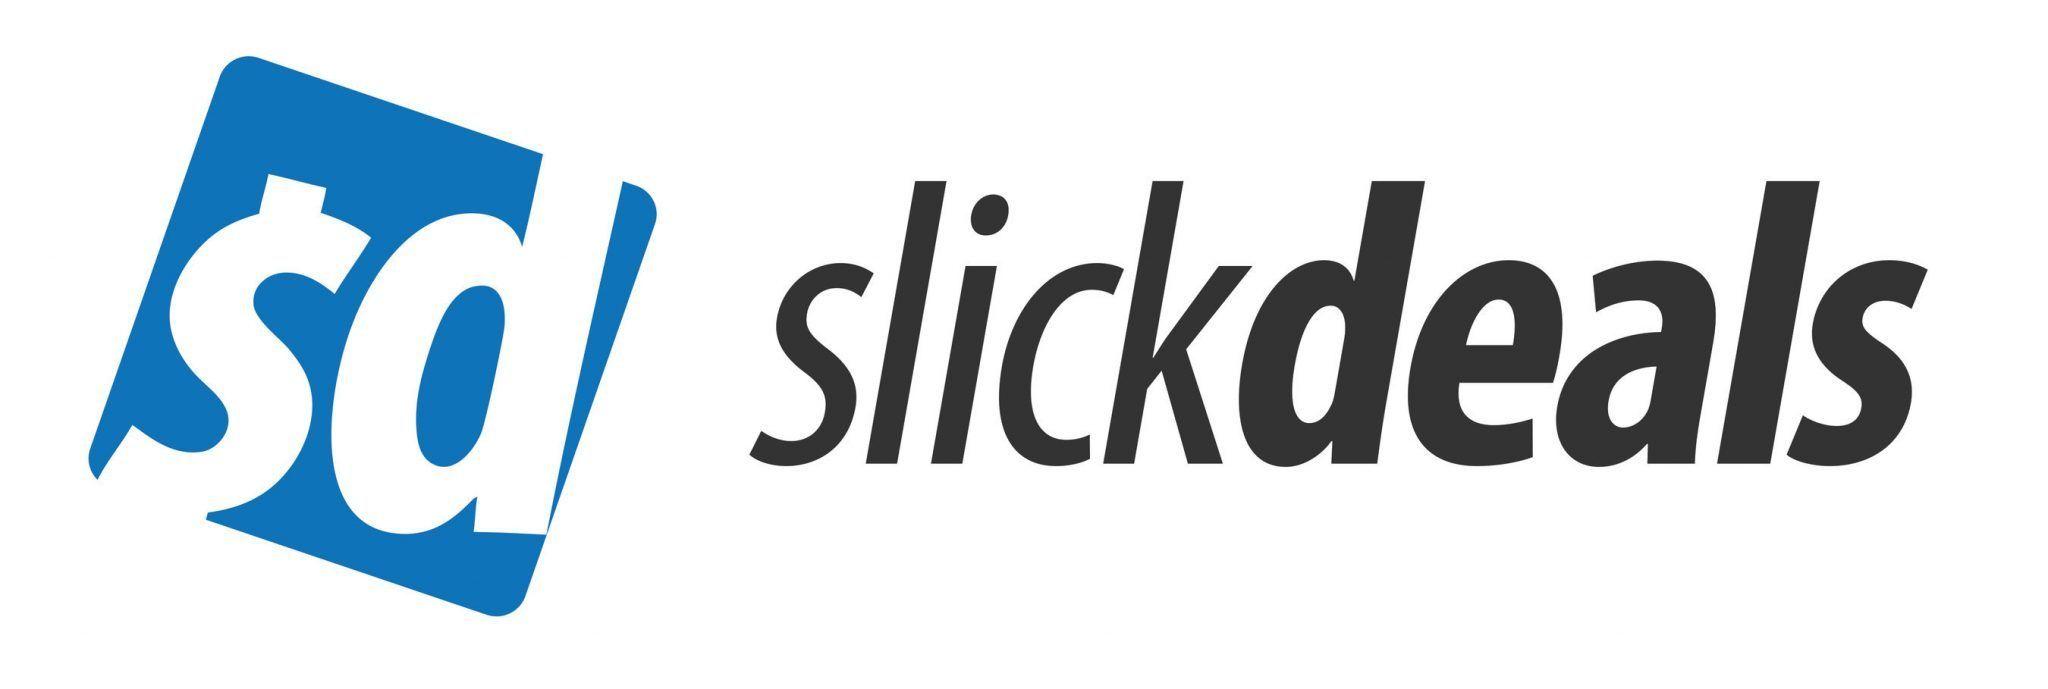 Slickdeals Logo - Andy's Favorite Things. Slickdeals's Favorite Things